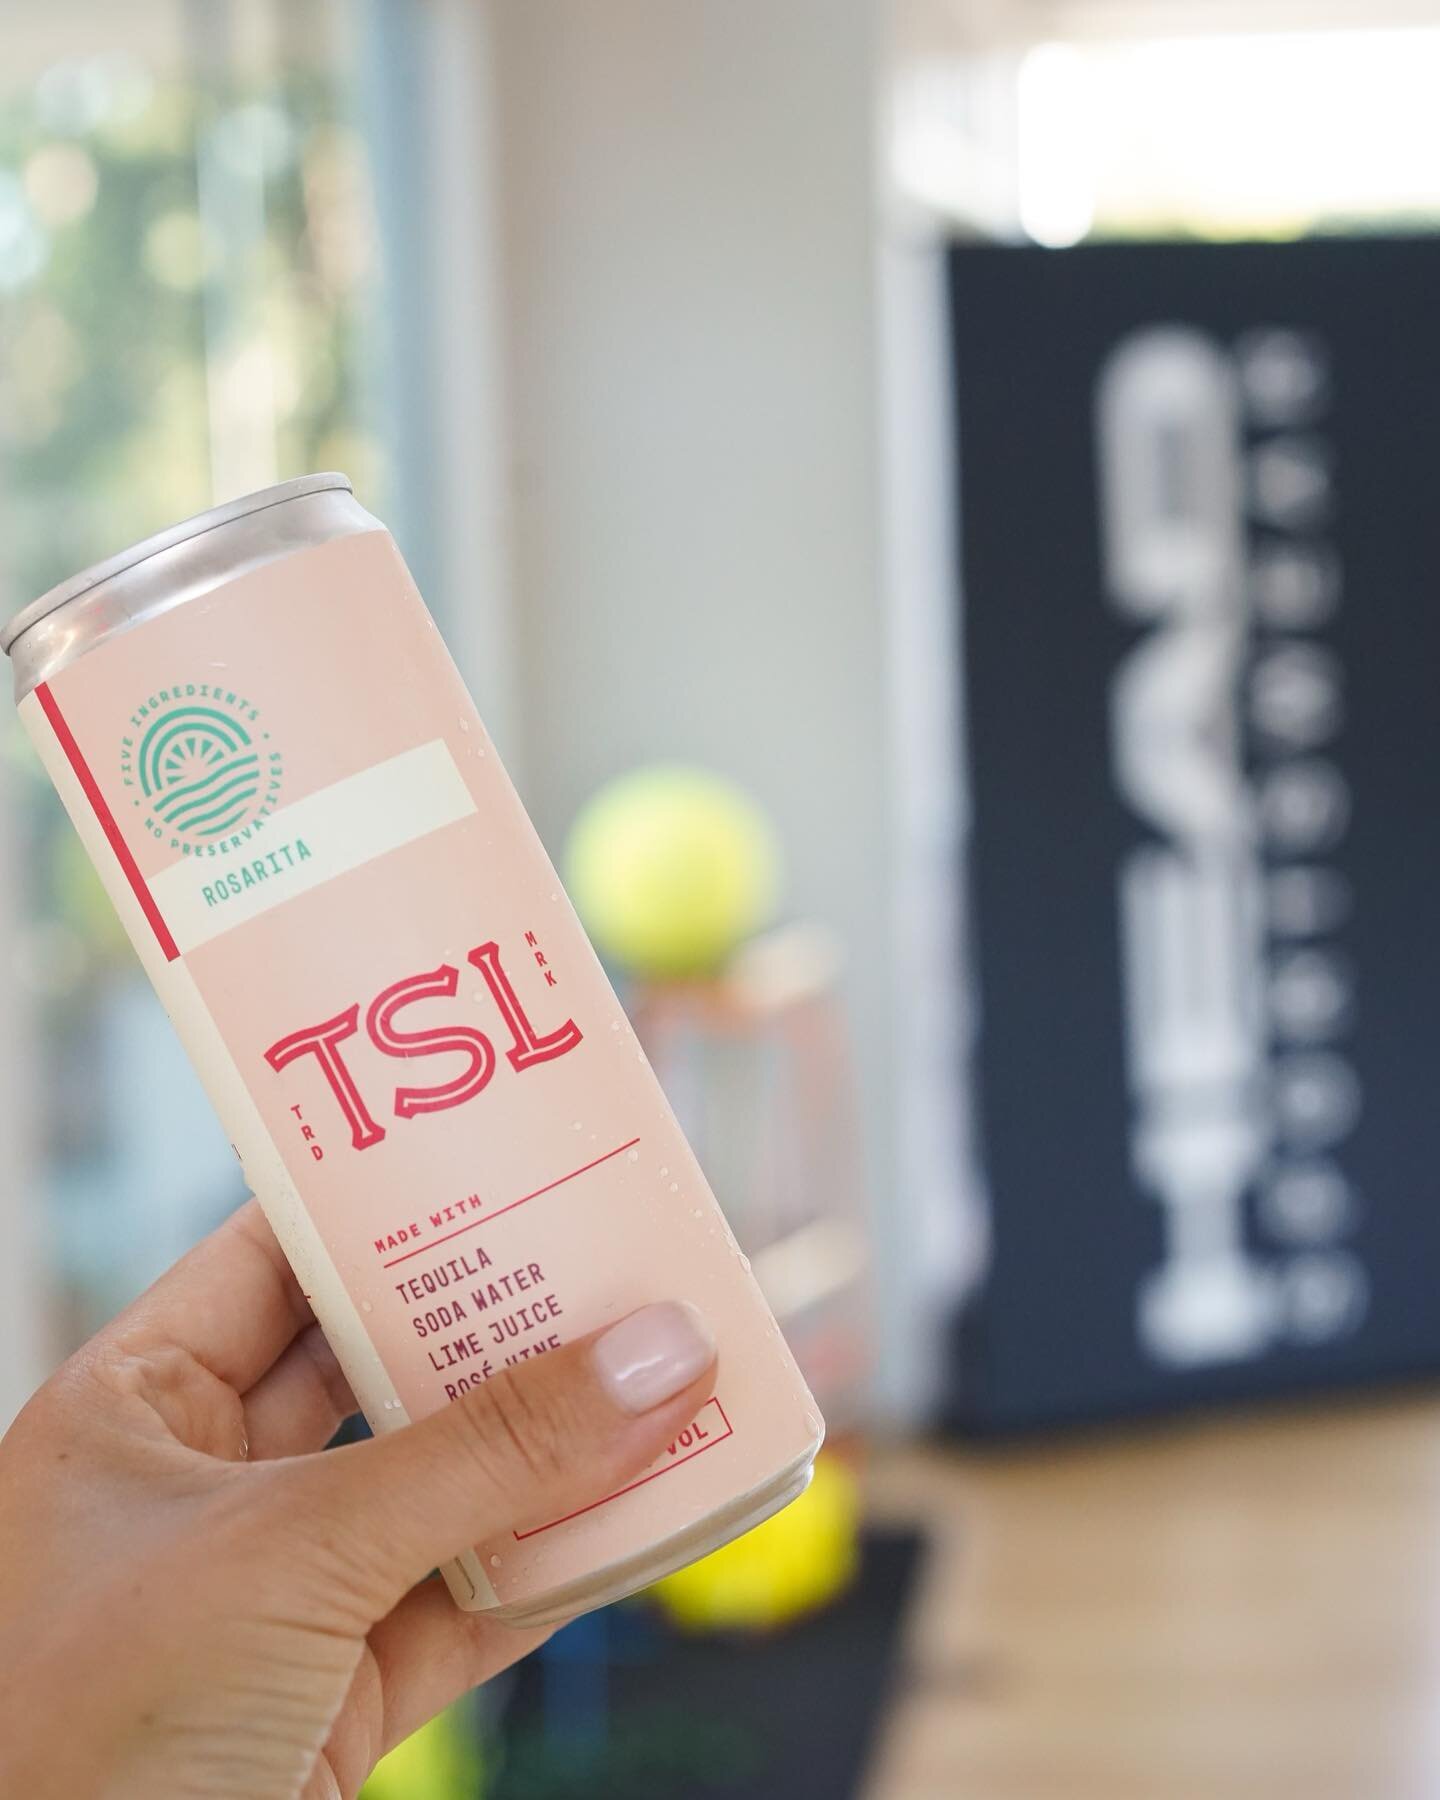 Quick drop from the @bandier and @headsportswear event in LA this week! Such a huge day for @drinktsl - THANK YOU!
.
.
.
.
.
#usopen #head #djokovic #alcaraz #tsl #tequila #soda #lime #rosarita #anywhereyoucan #tennis #pickleball #fashion #summer